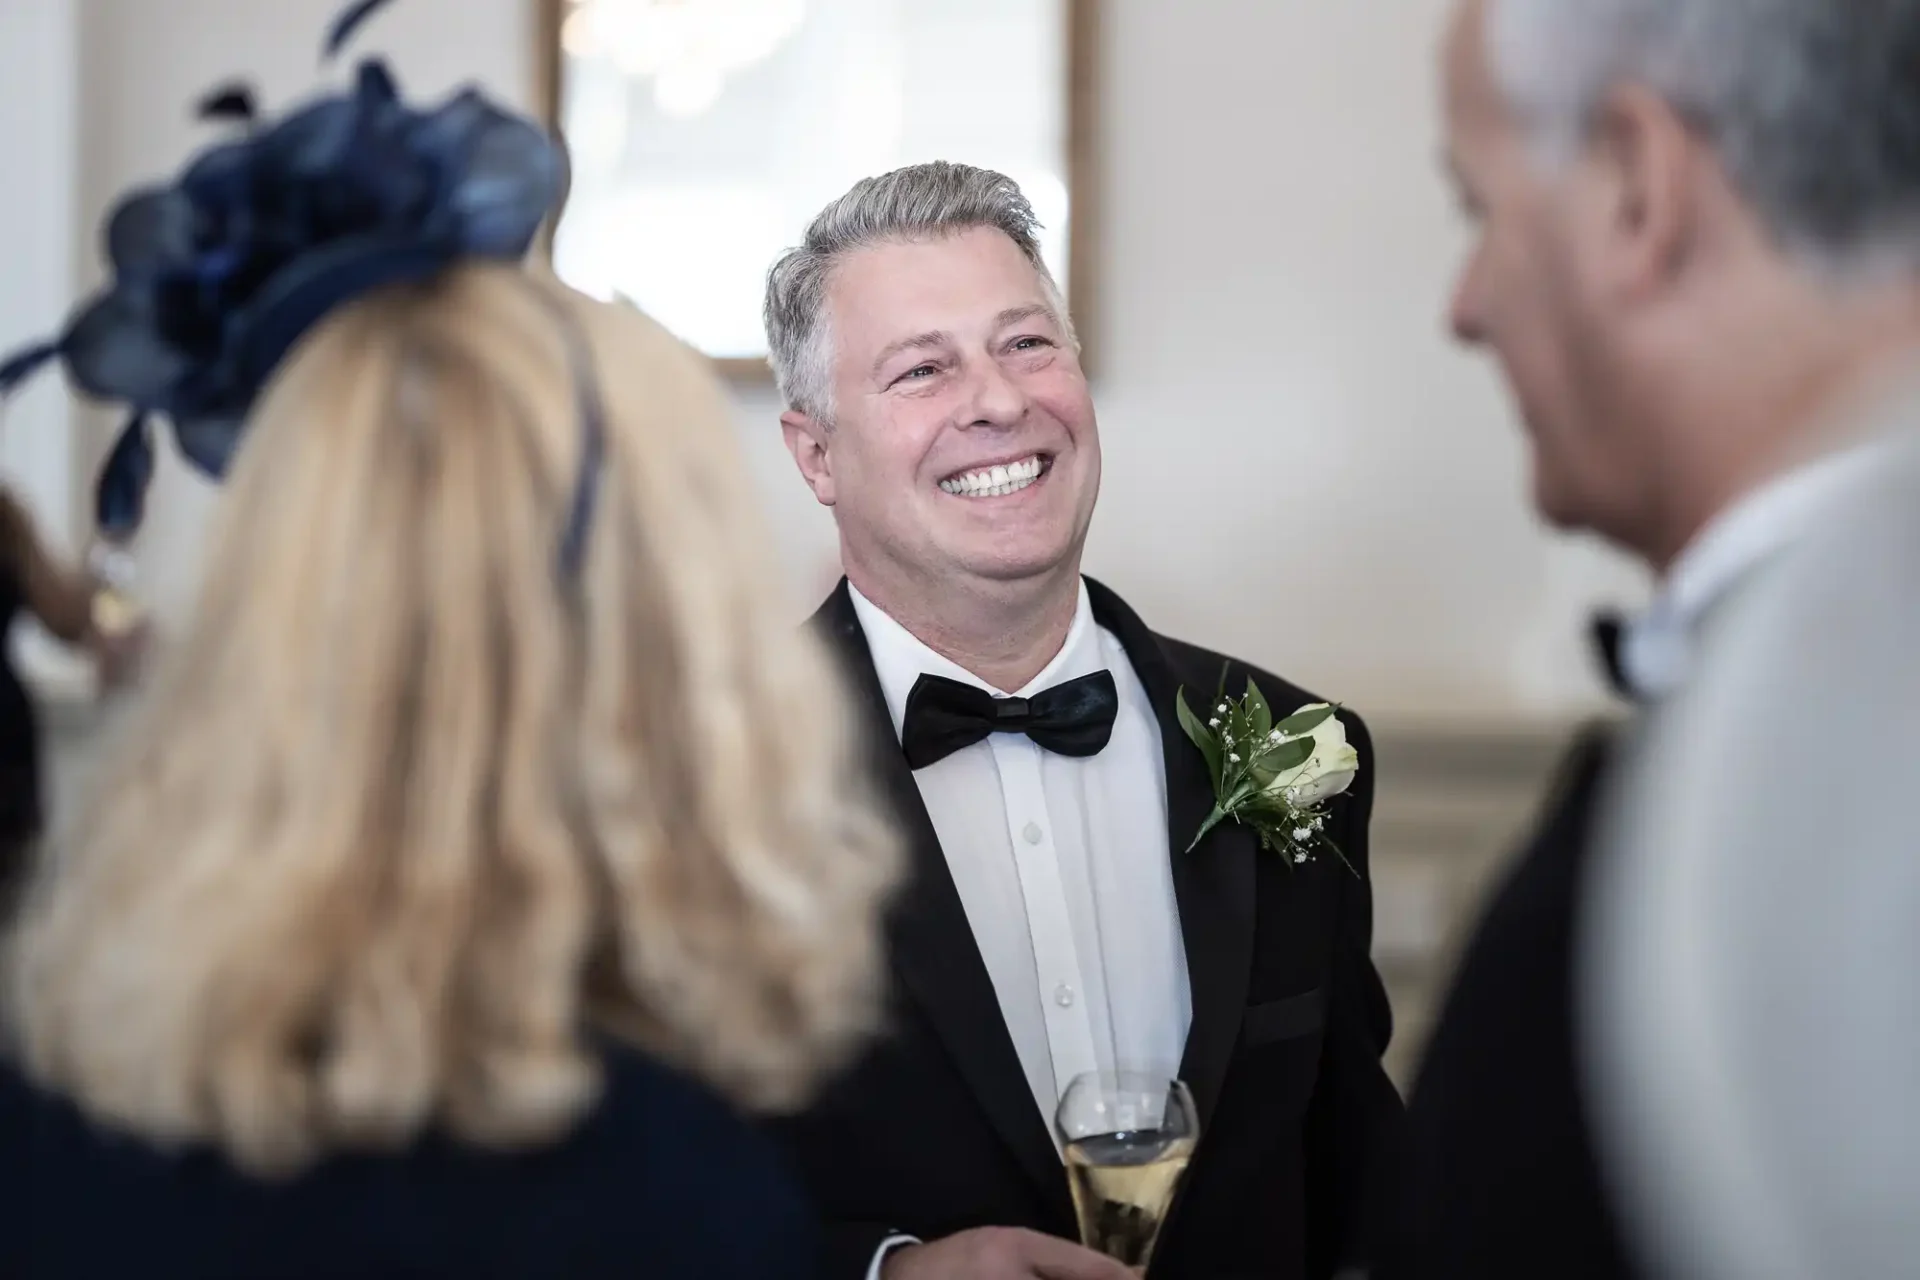 Man in a tuxedo with a boutonniere, holding a champagne flute, smiling while conversing with guests at a formal event.